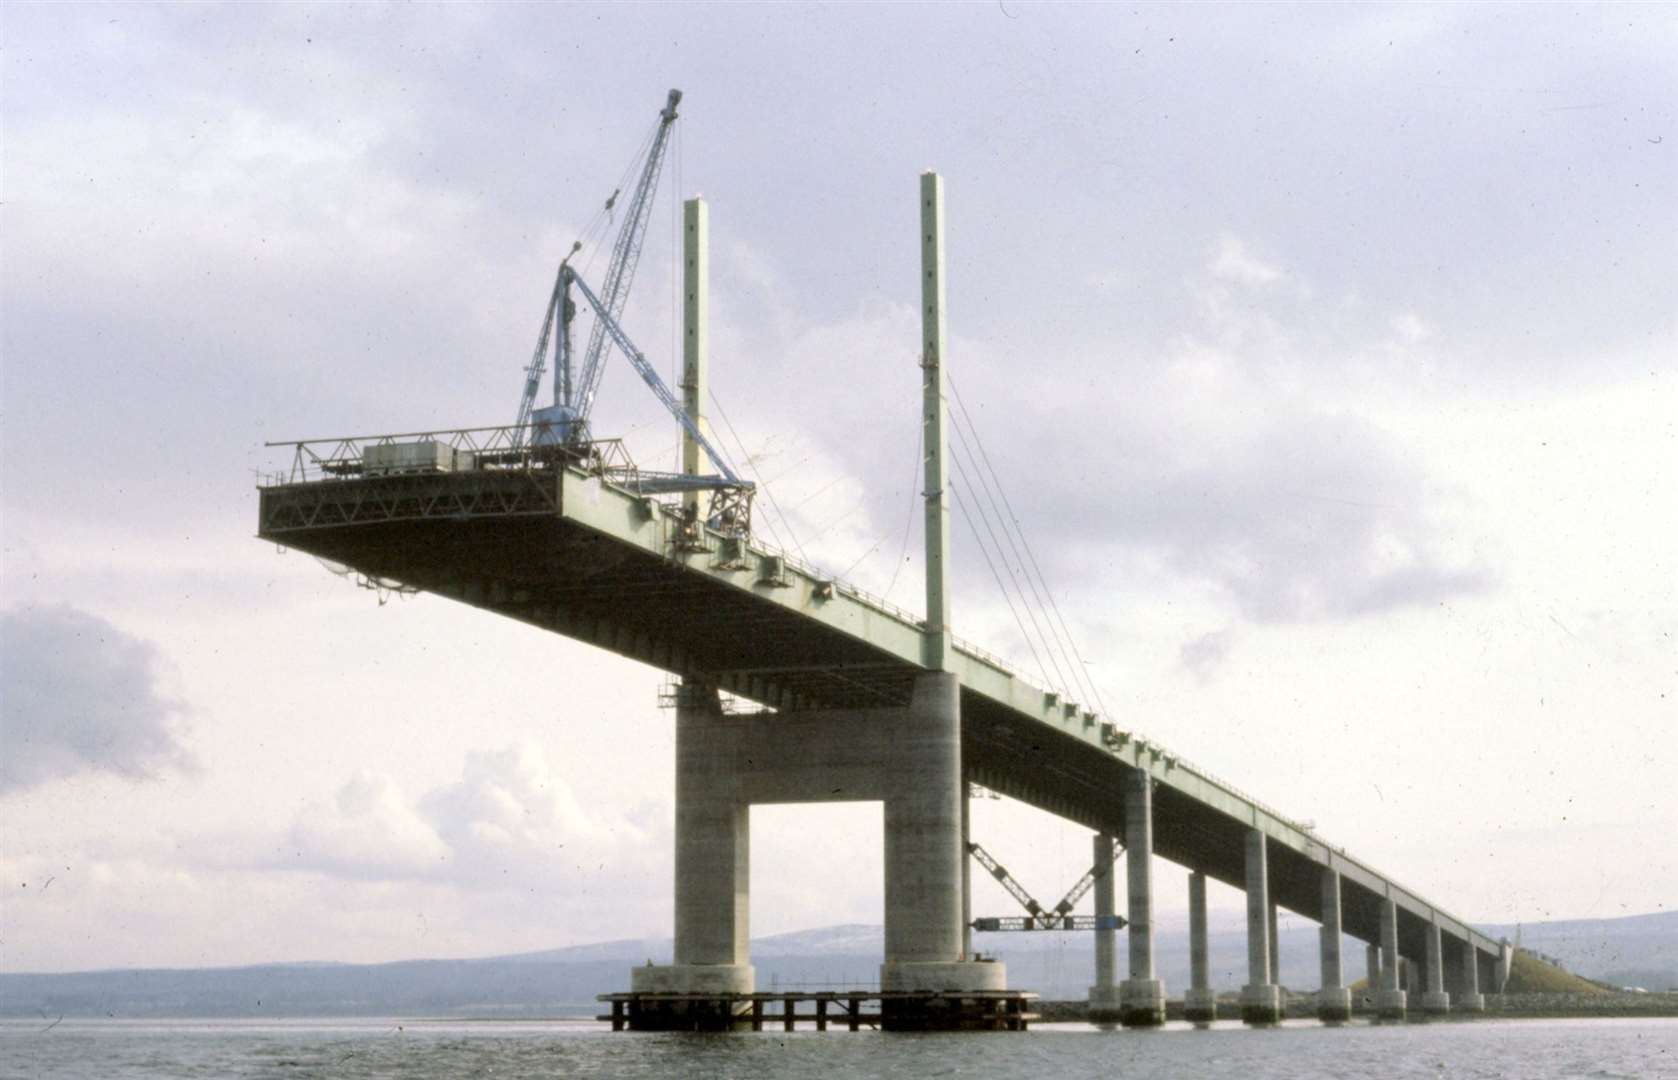 A dramatic image showing the south side of the bridge reaching out towards the Black Isle.